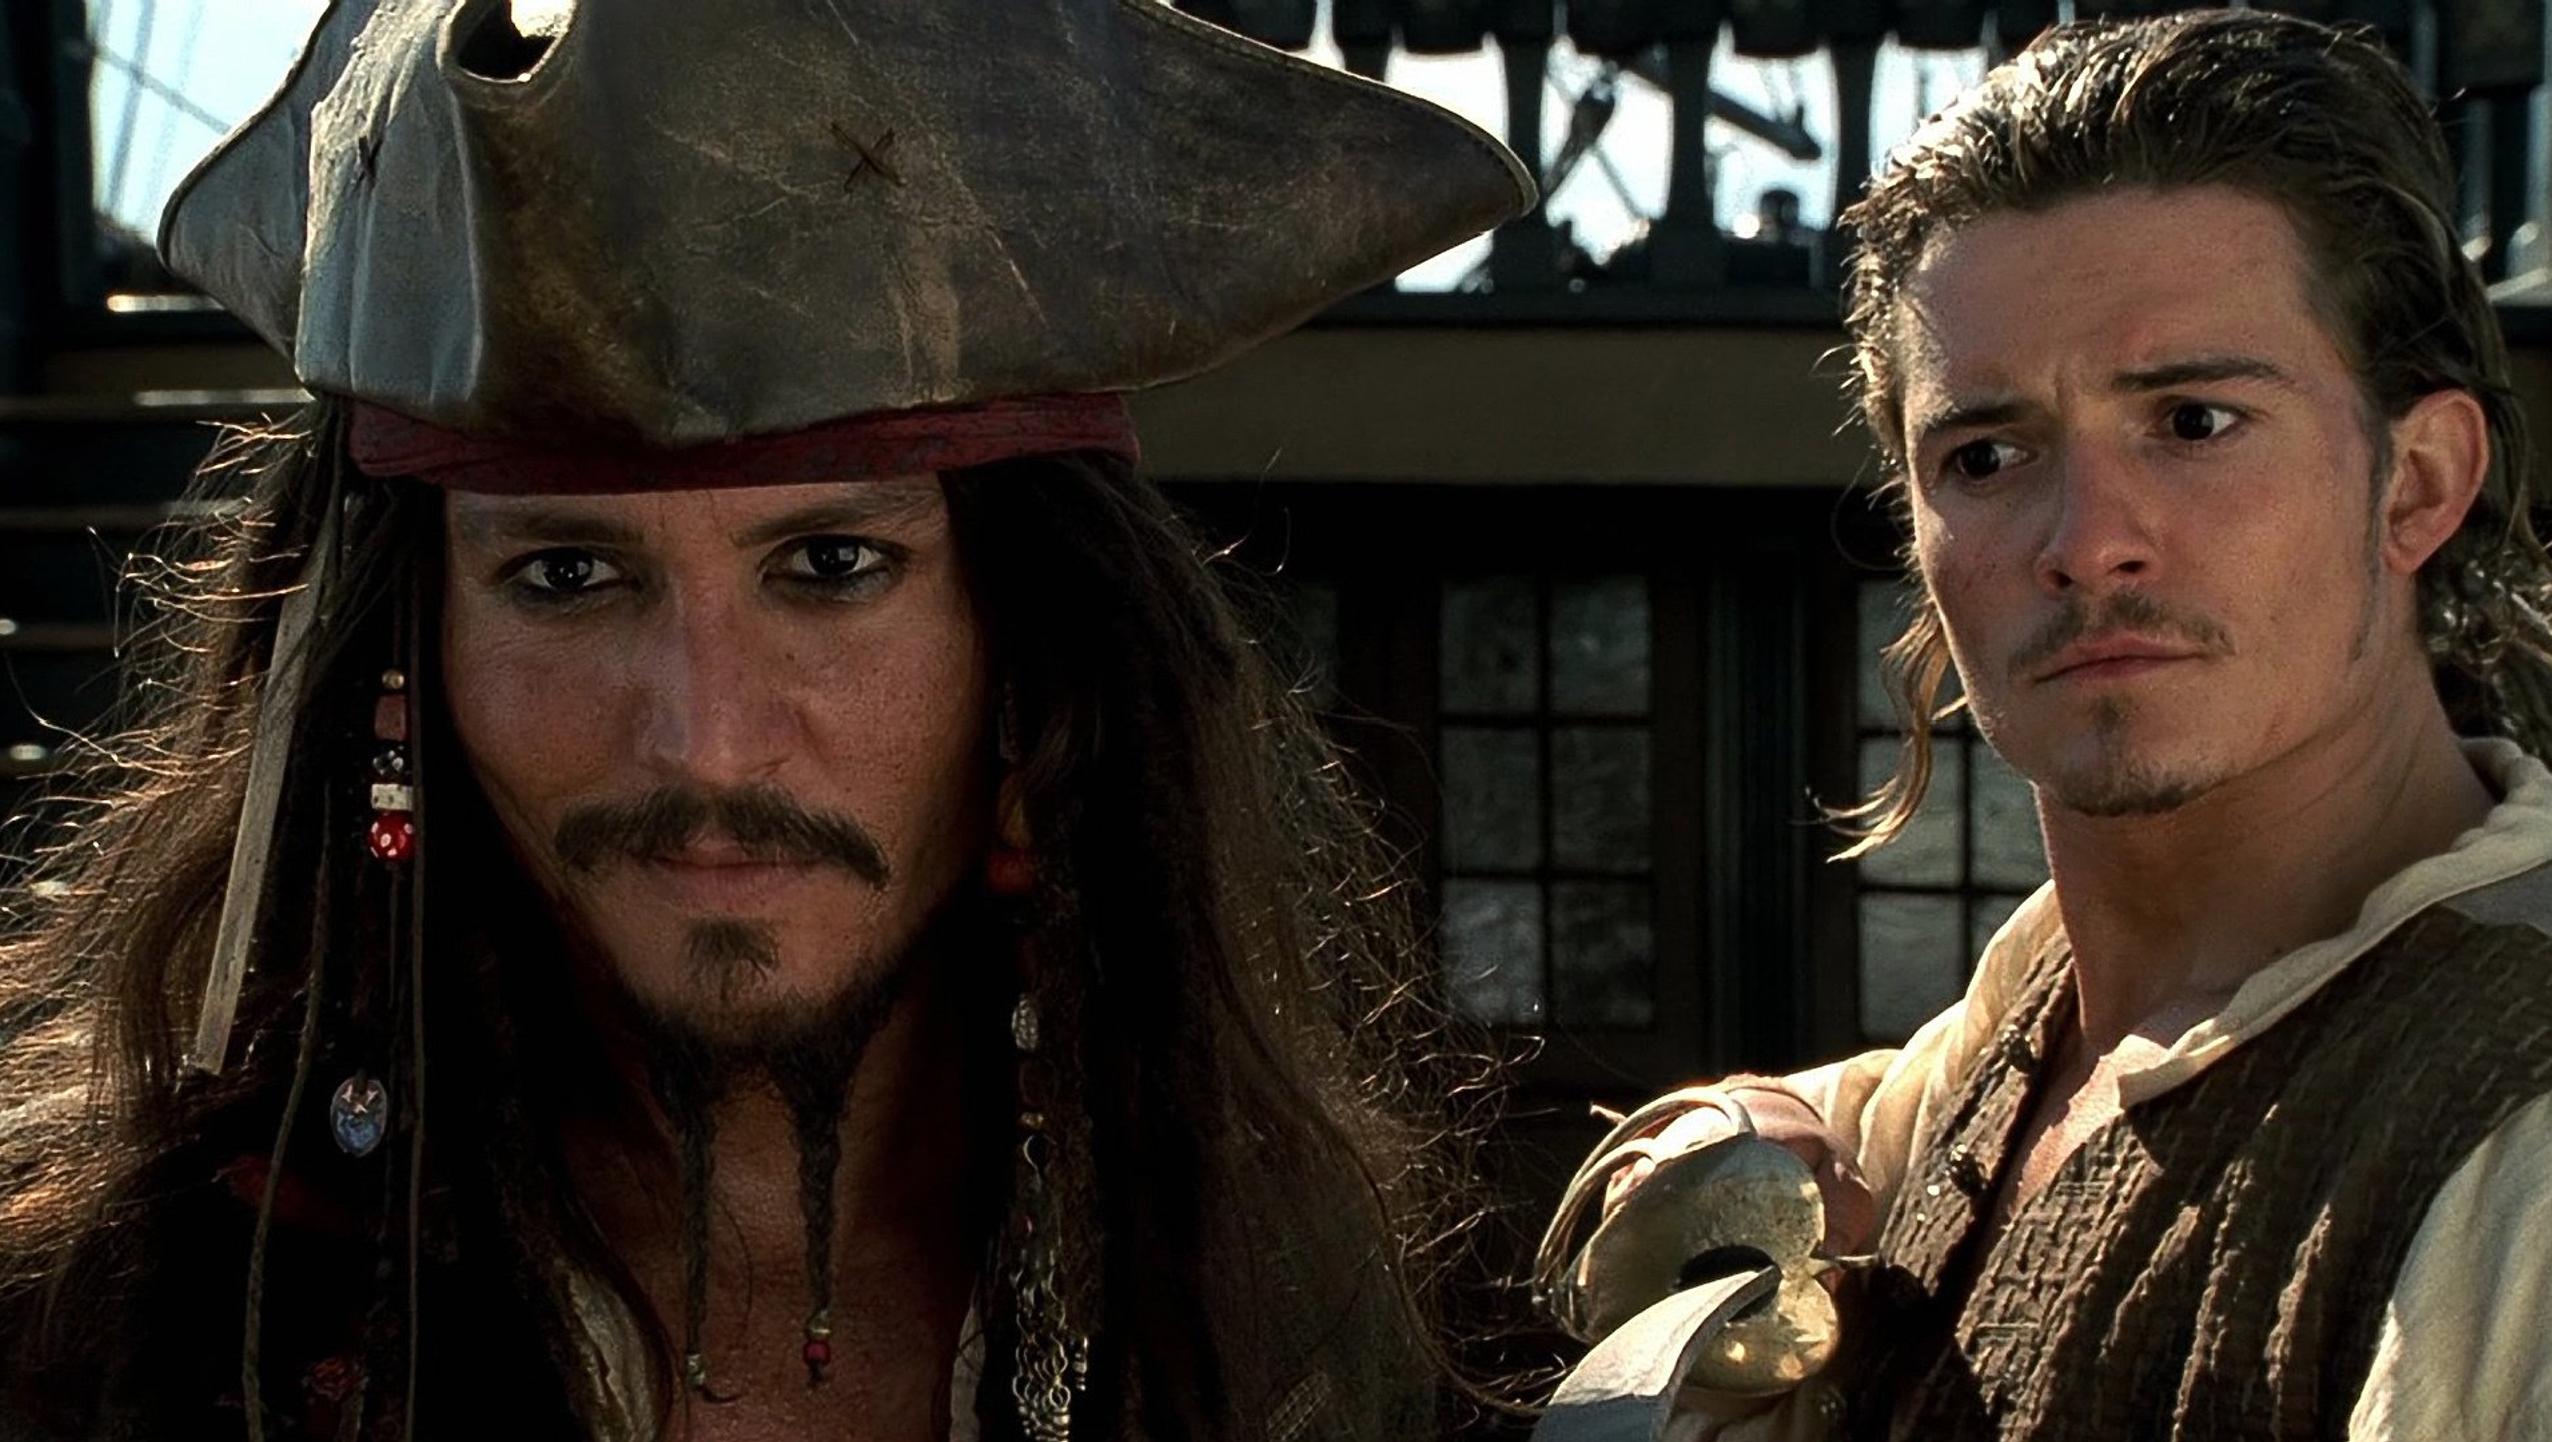 Pirates of the Caribbean: The Curse of the Black Pearl (2003) Desktop Wallpaper